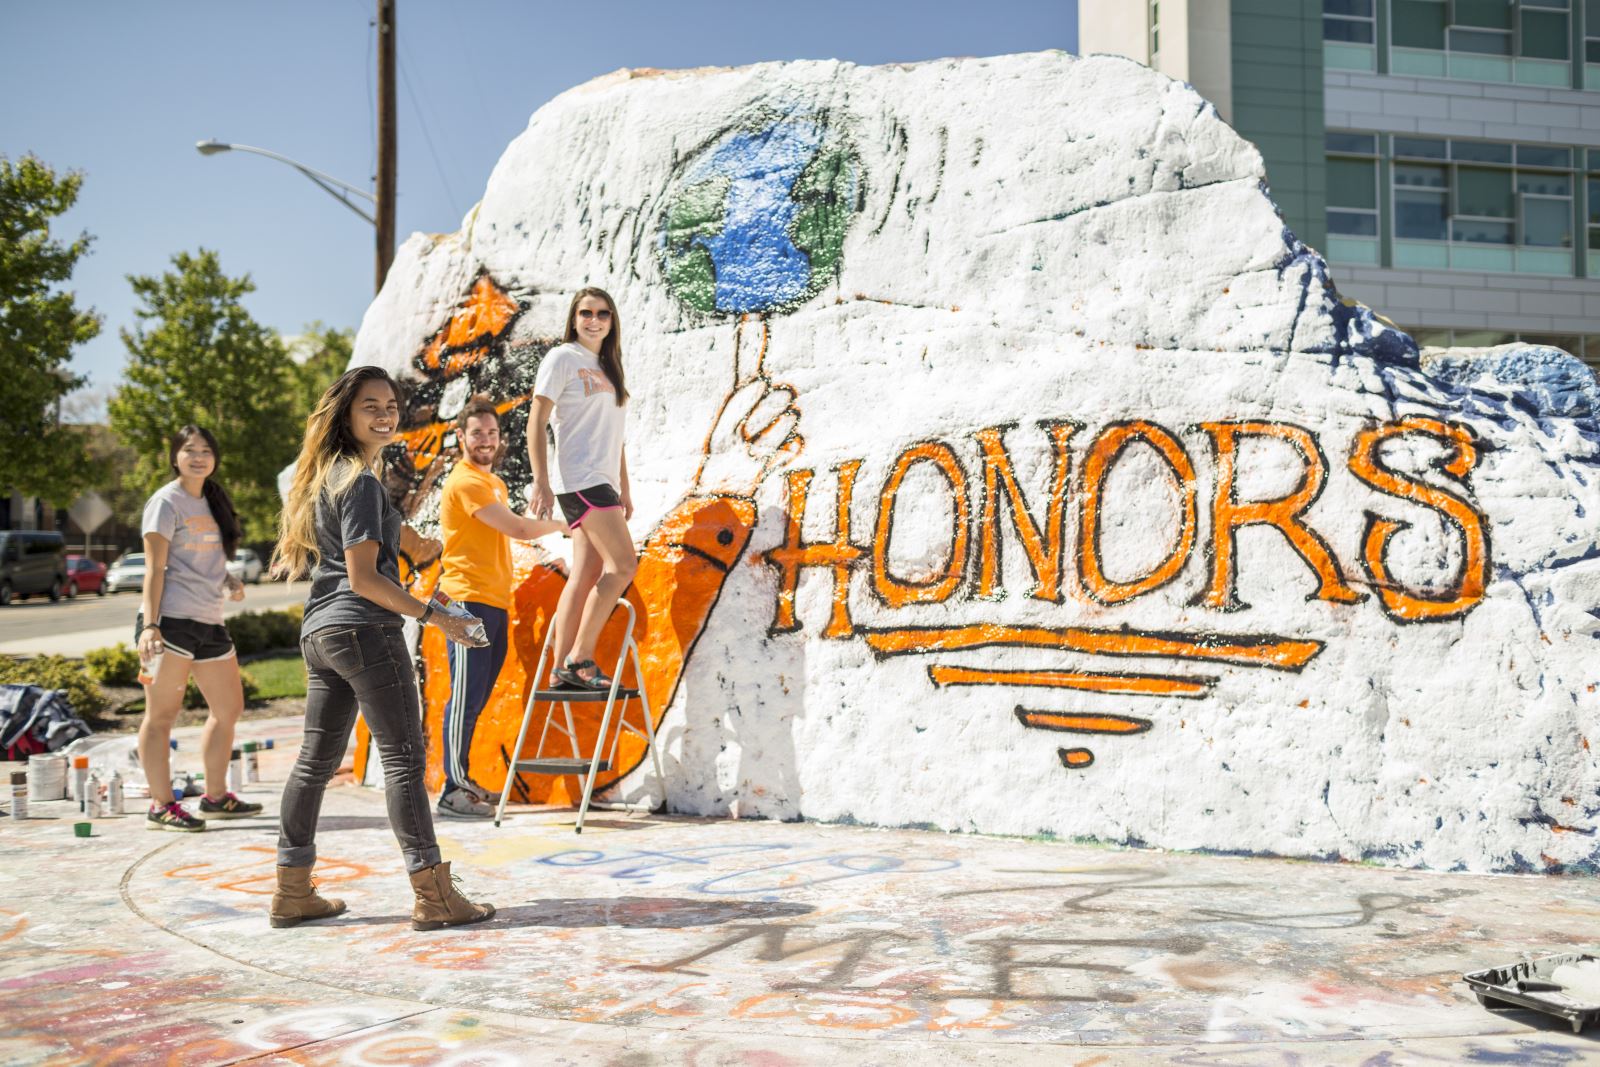 The Rock painted by University Honors students.